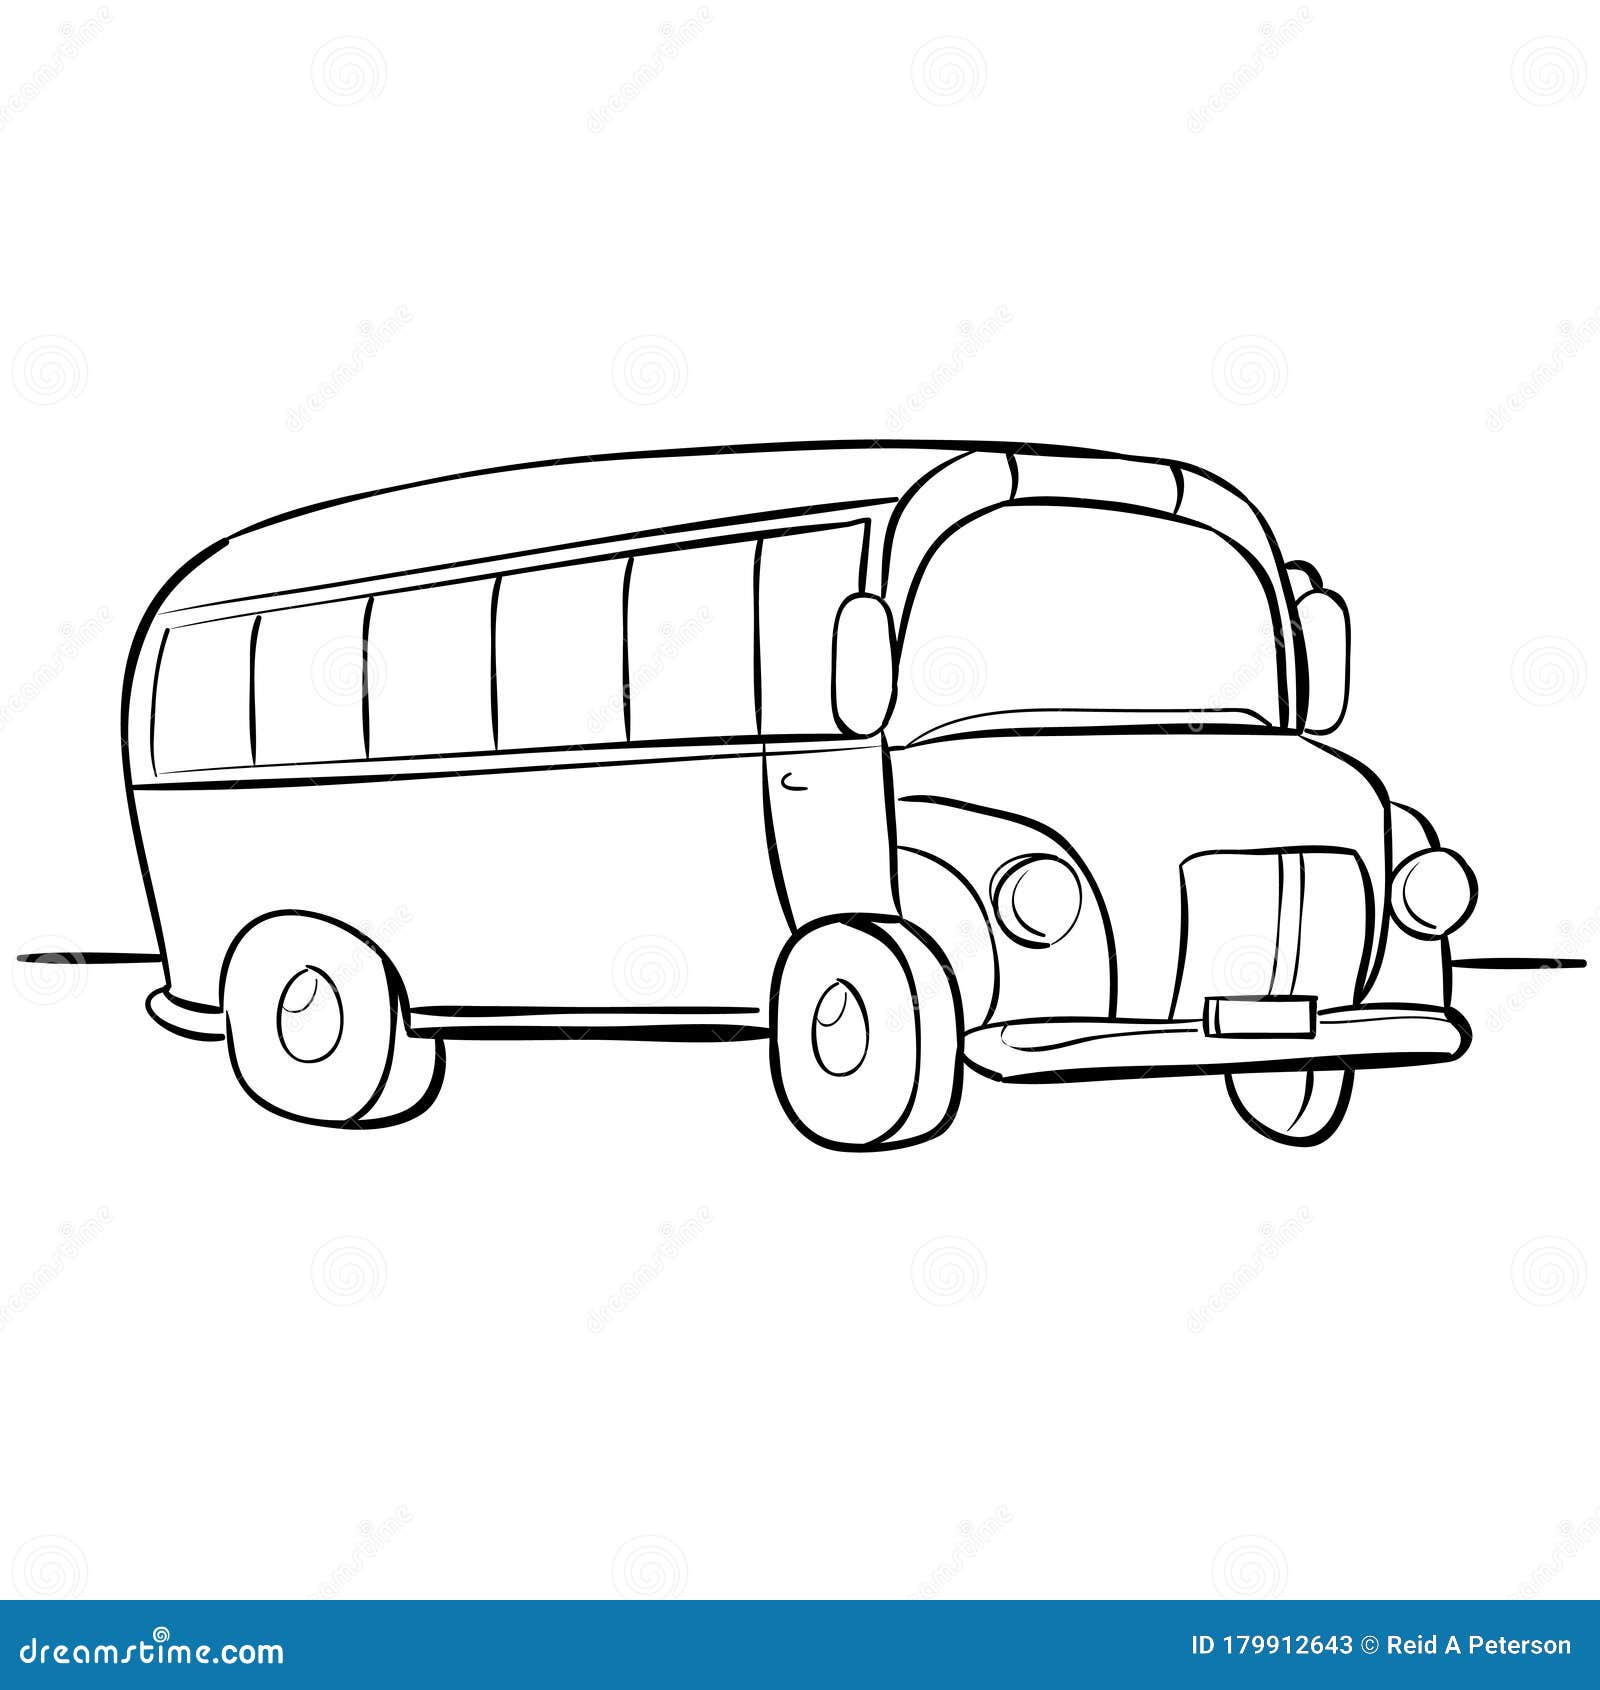 Buses Colouring Pages Colouring Book Colouring Book for - Etsy